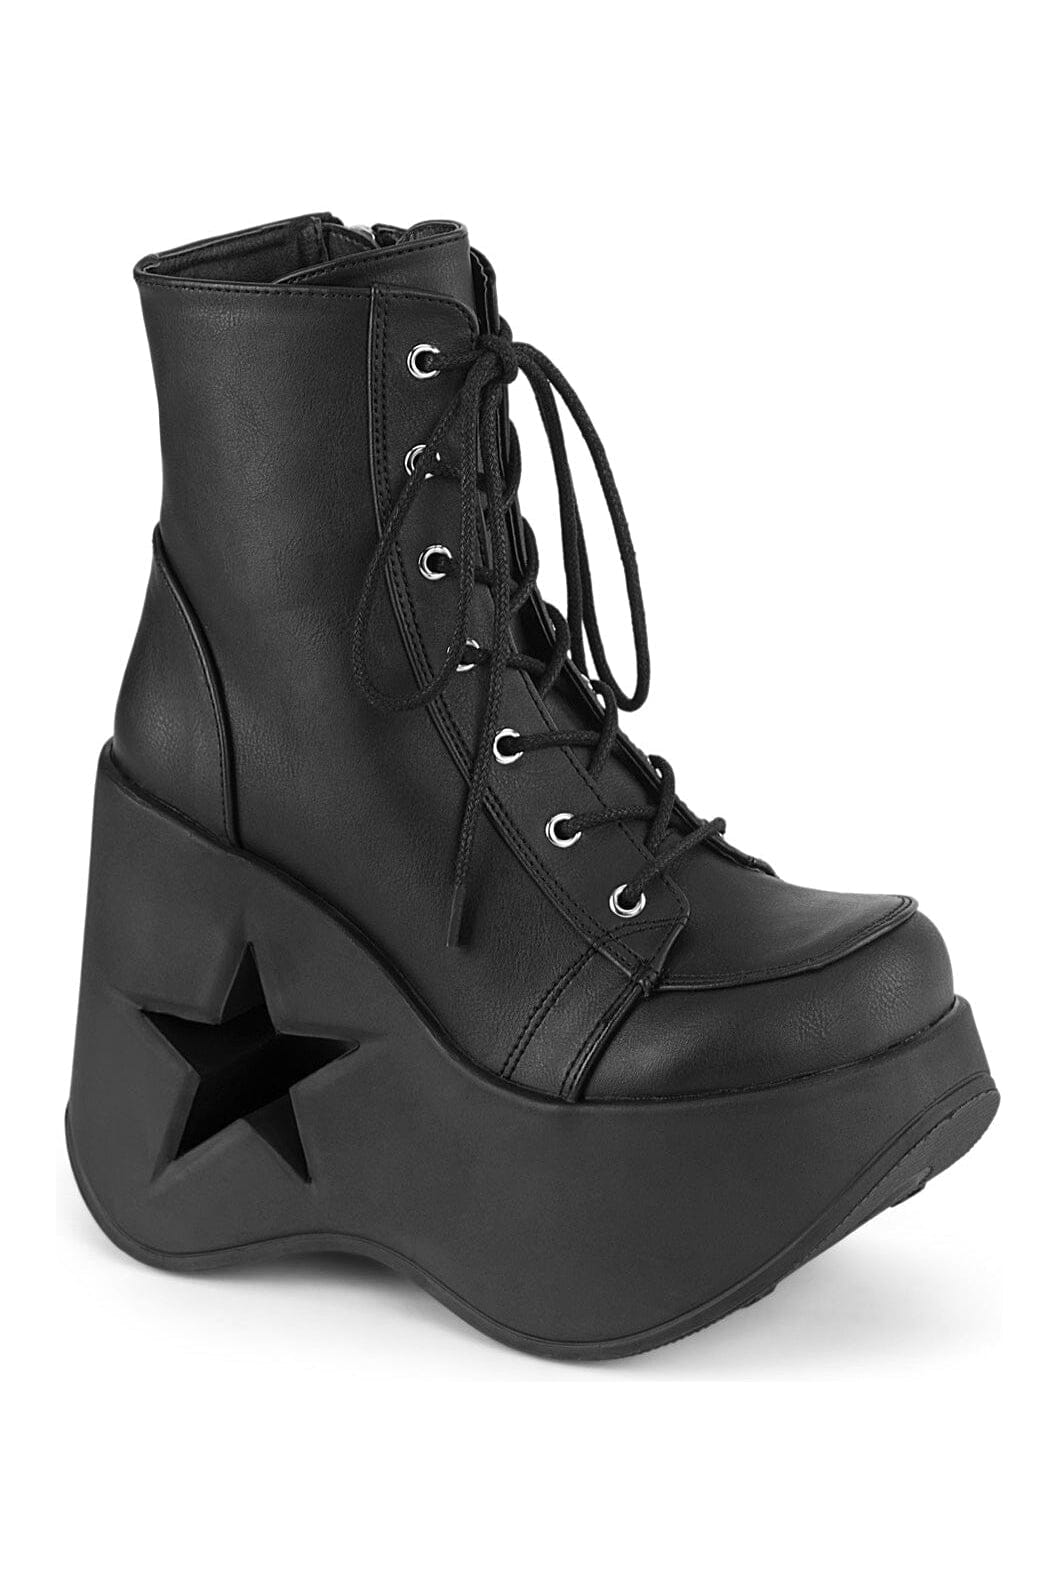 DYNAMITE-106 Black Vegan Leather Ankle Boot-Ankle Boots-Demonia-Black-10-Vegan Leather-SEXYSHOES.COM